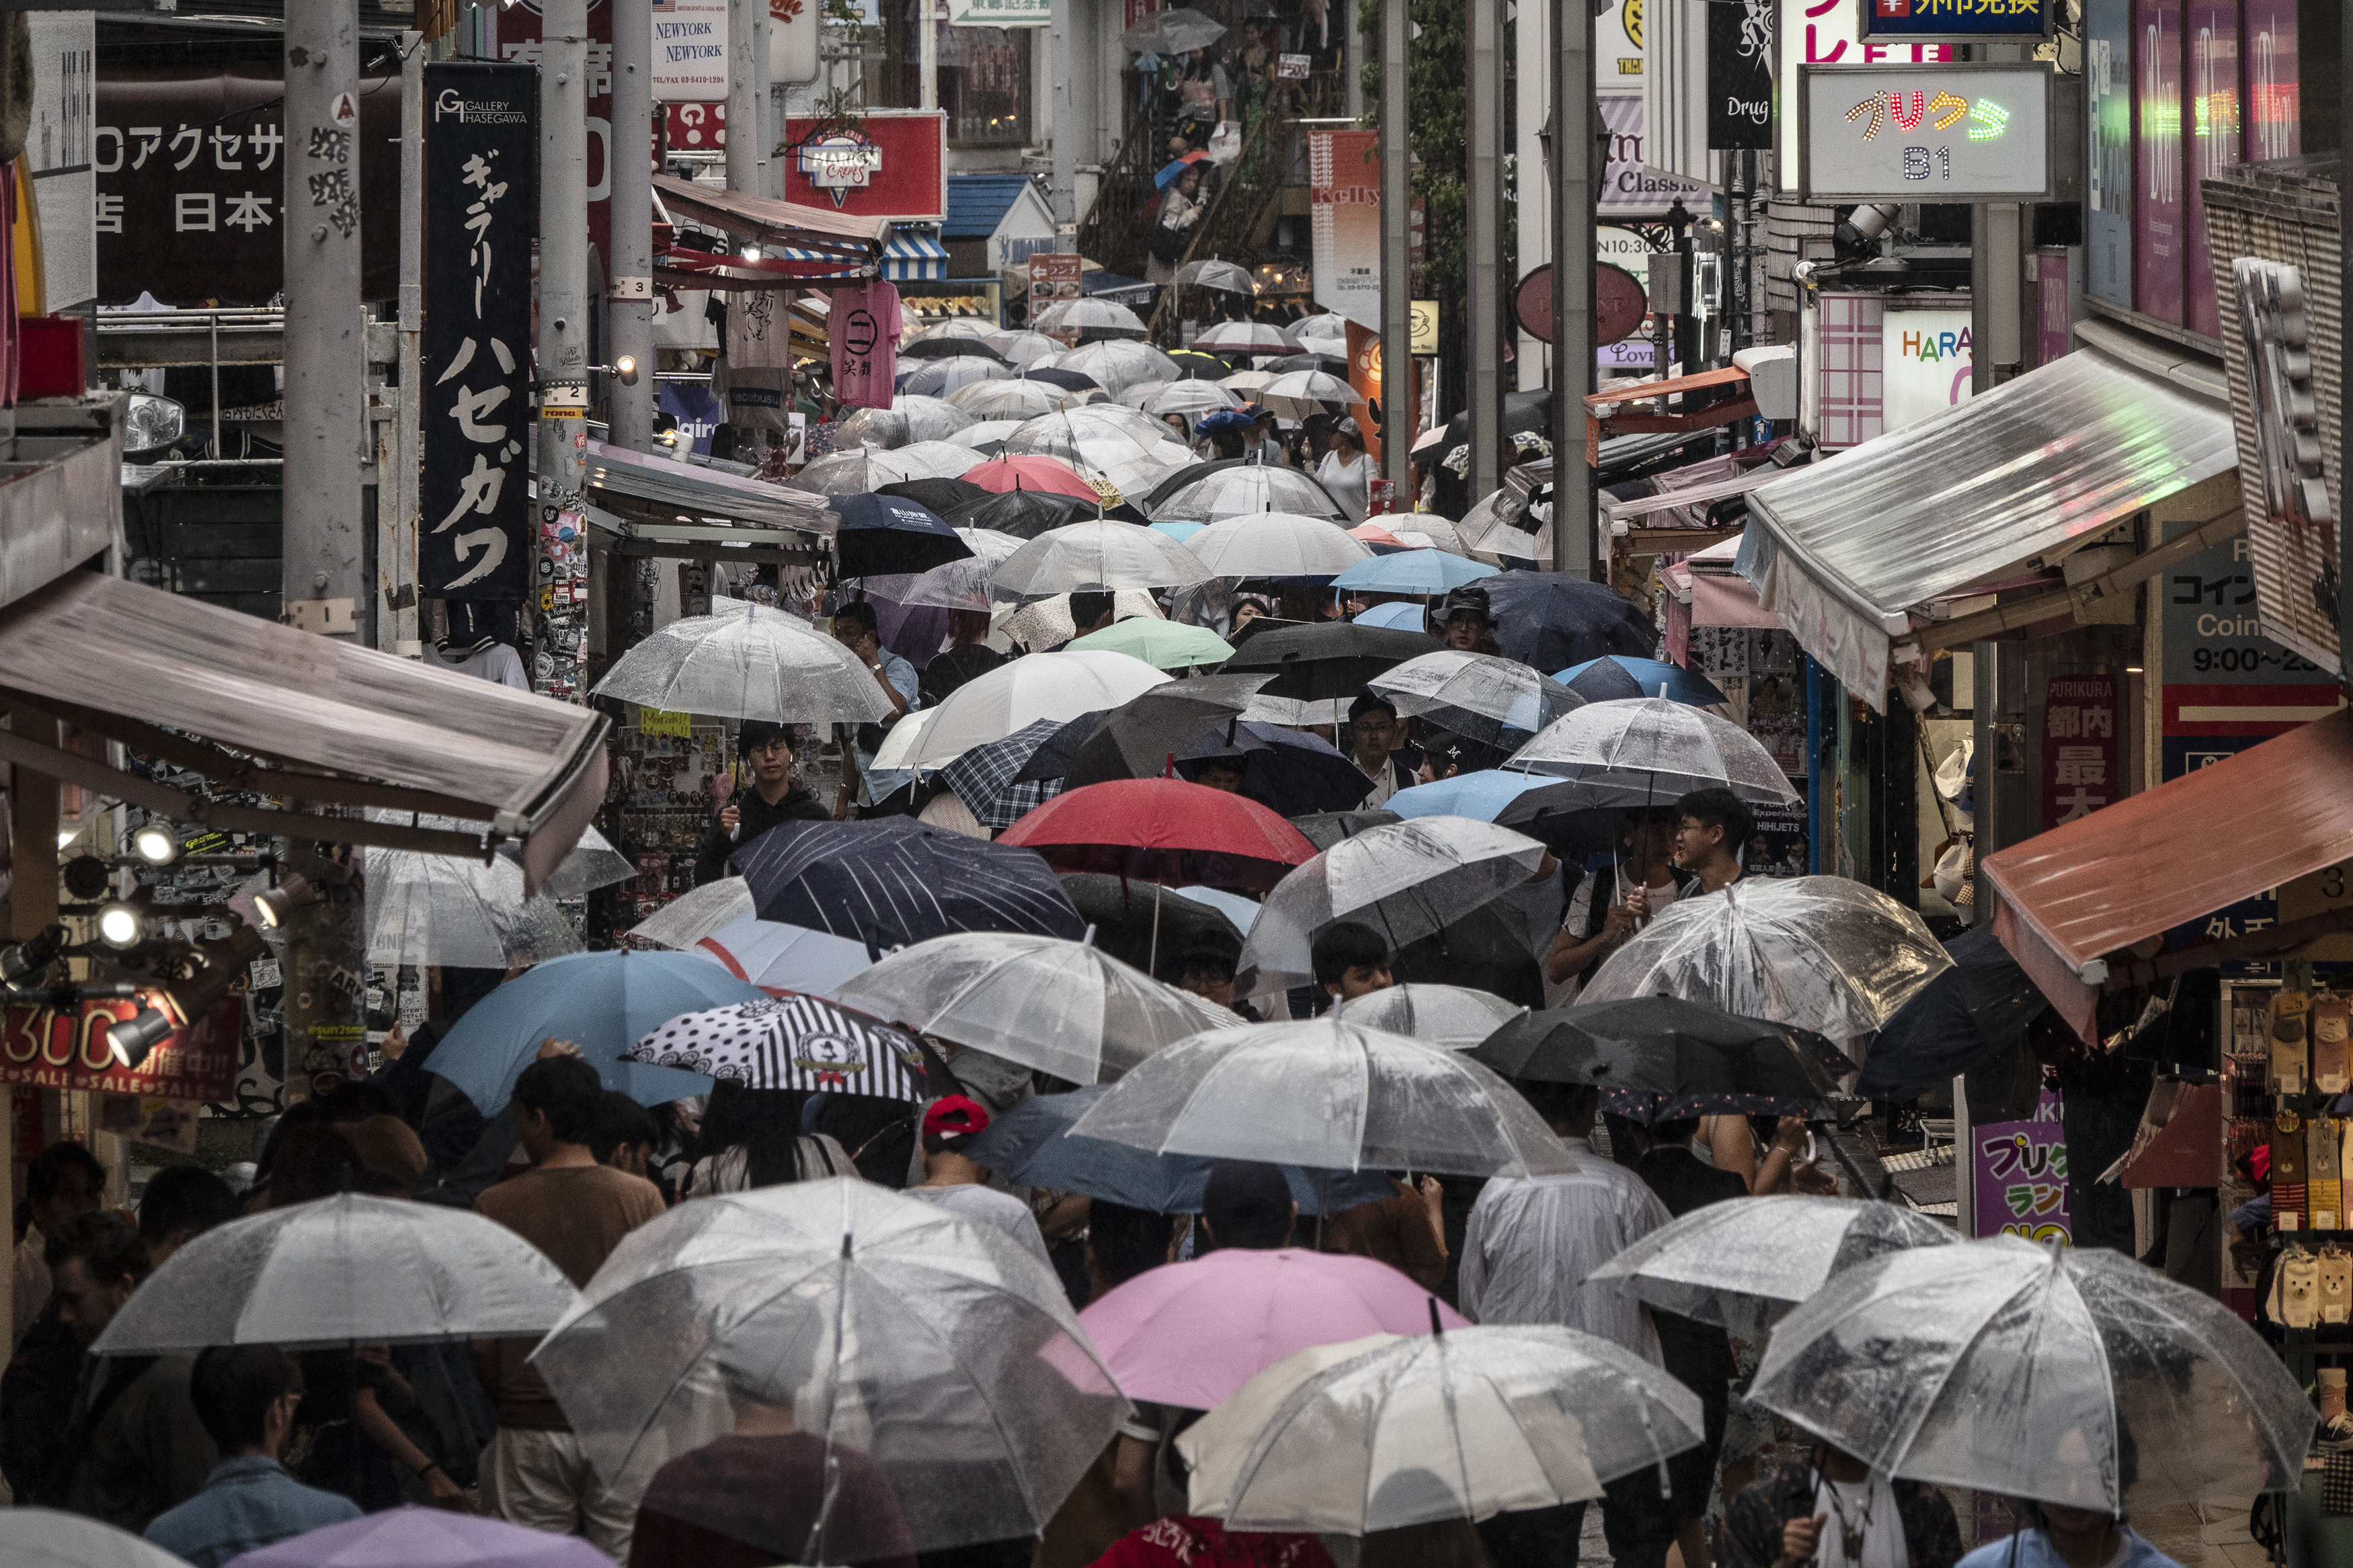 Shoppers with umbrellas walk along the Takeshita Street Friday, June 7, 2019, in the Harajuku district of Tokyo. Harajuku is one of the most popular shopping neighborhoods in Tokyo. (AP Photo/Jae C. Hong)